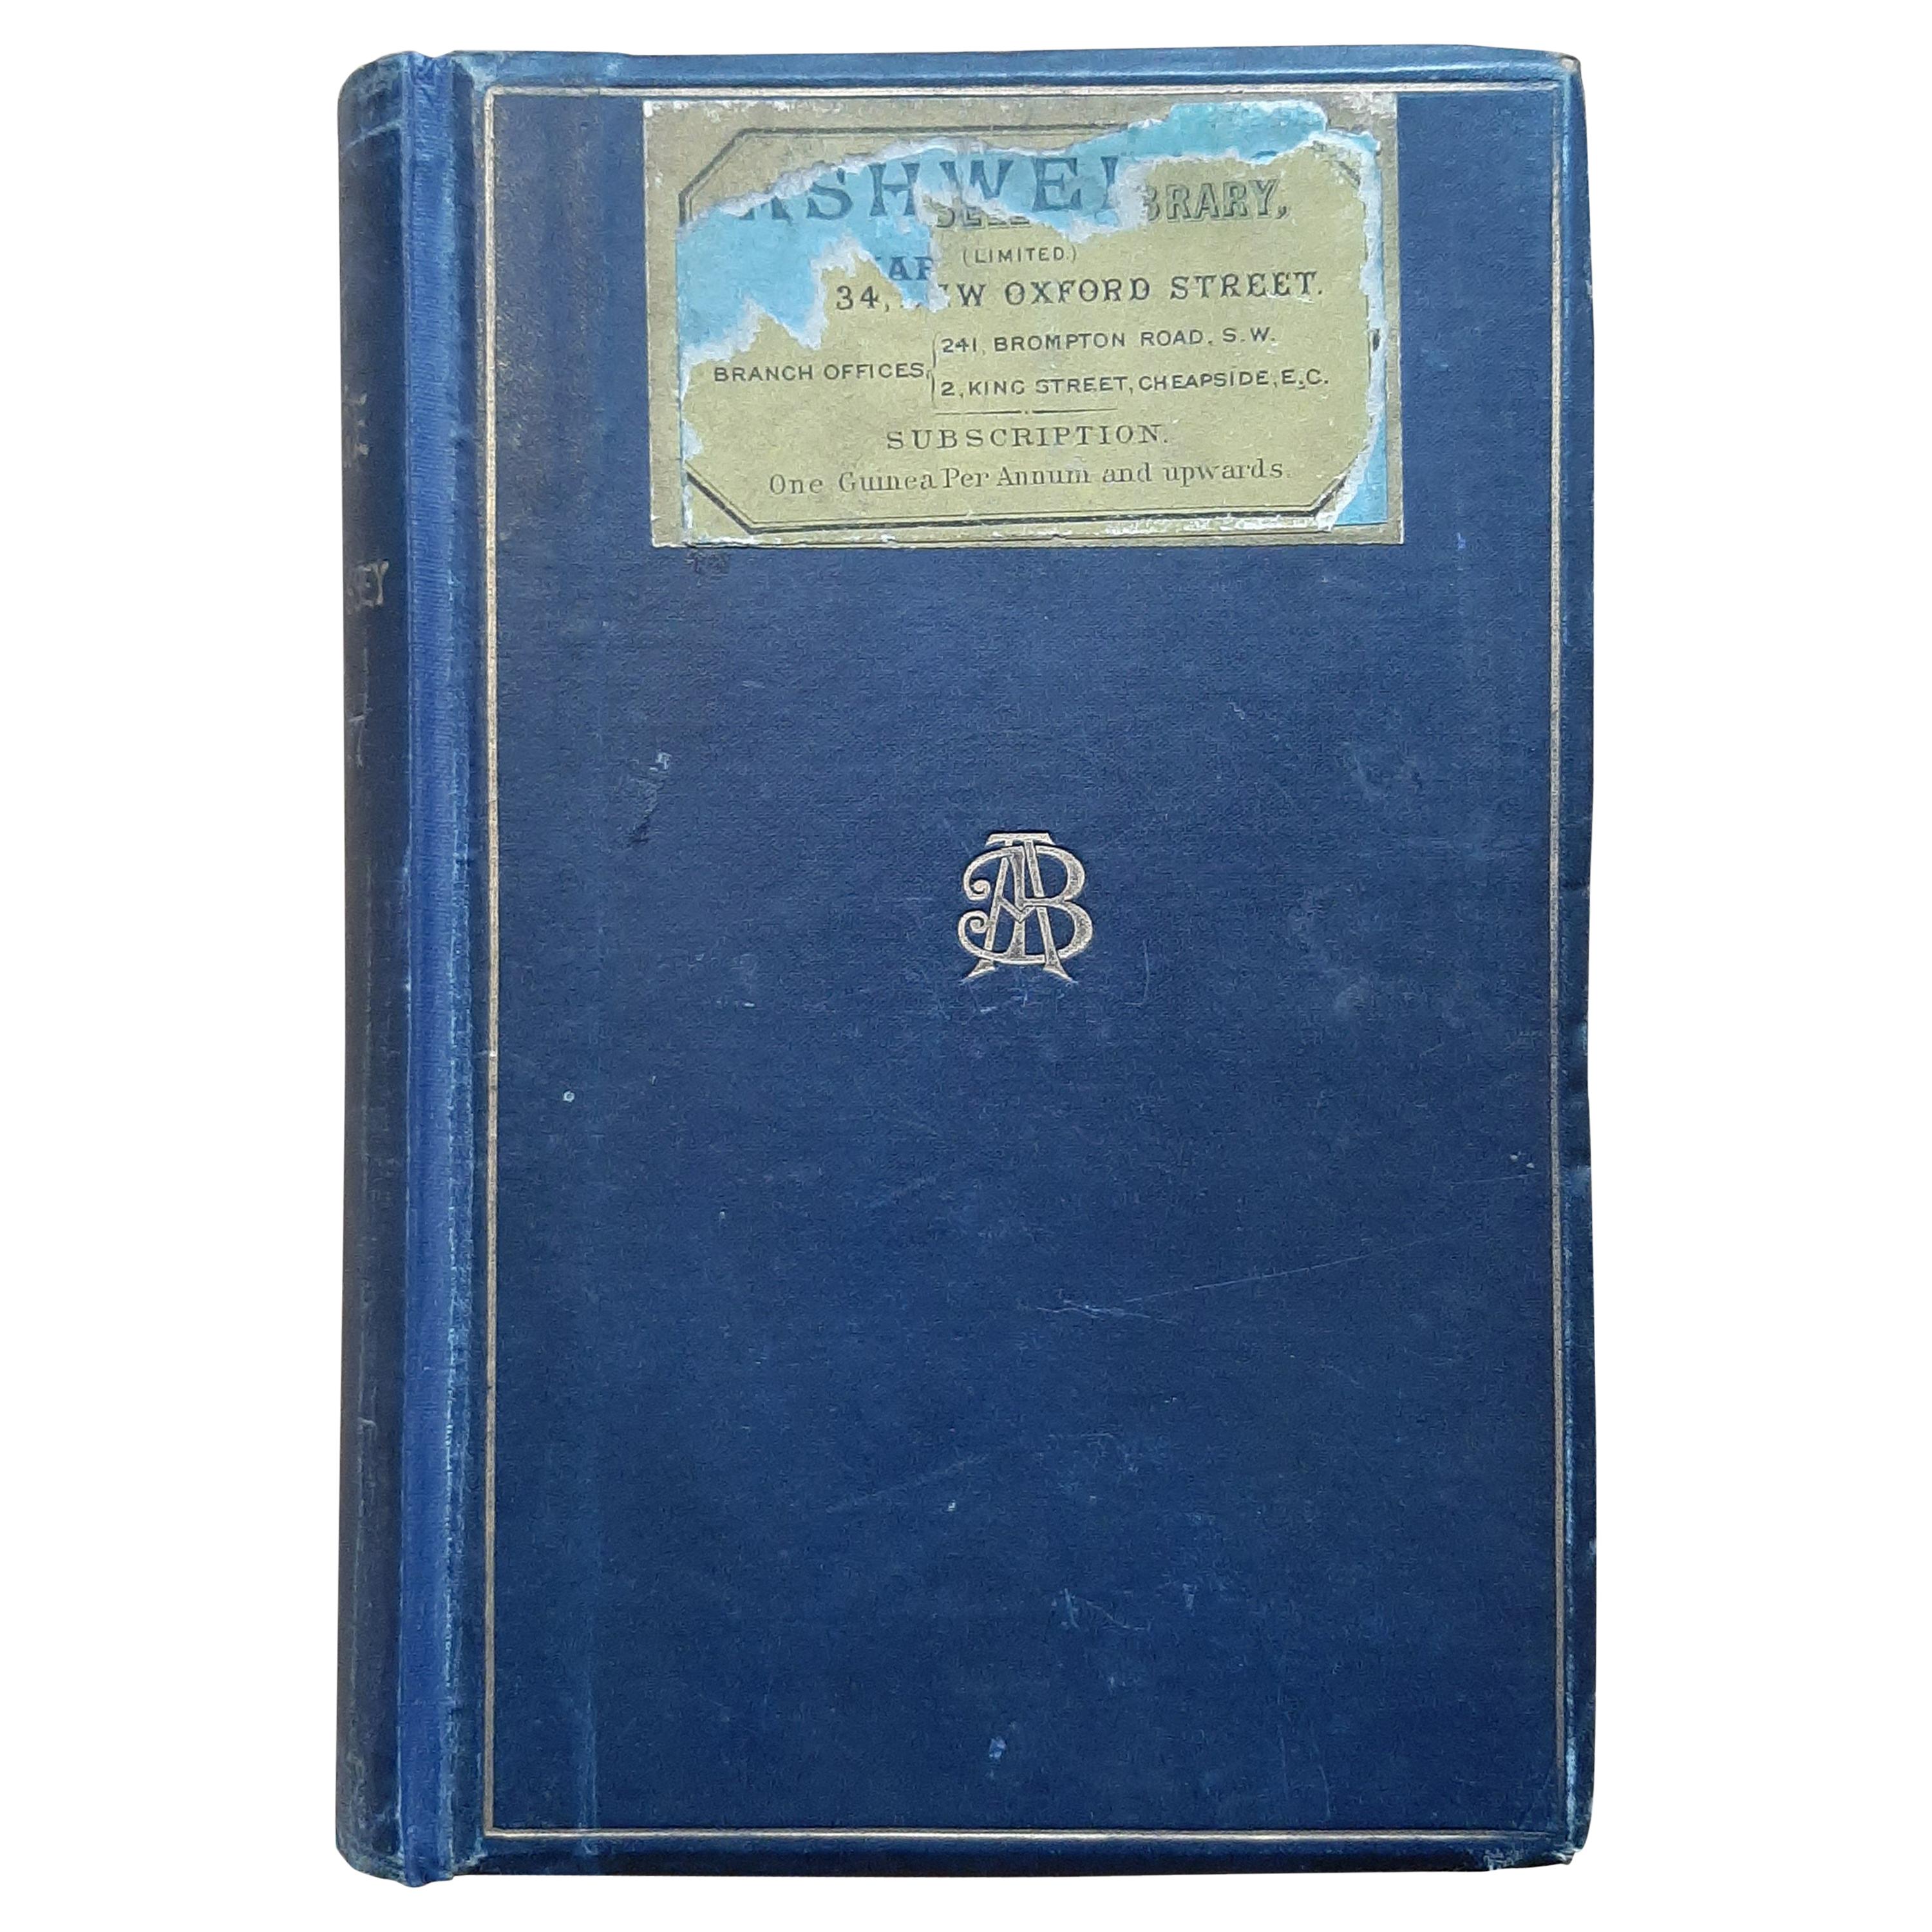 The Last Voyage, to India and Australia, in the Sunbeam by Annie Brassey, 1889